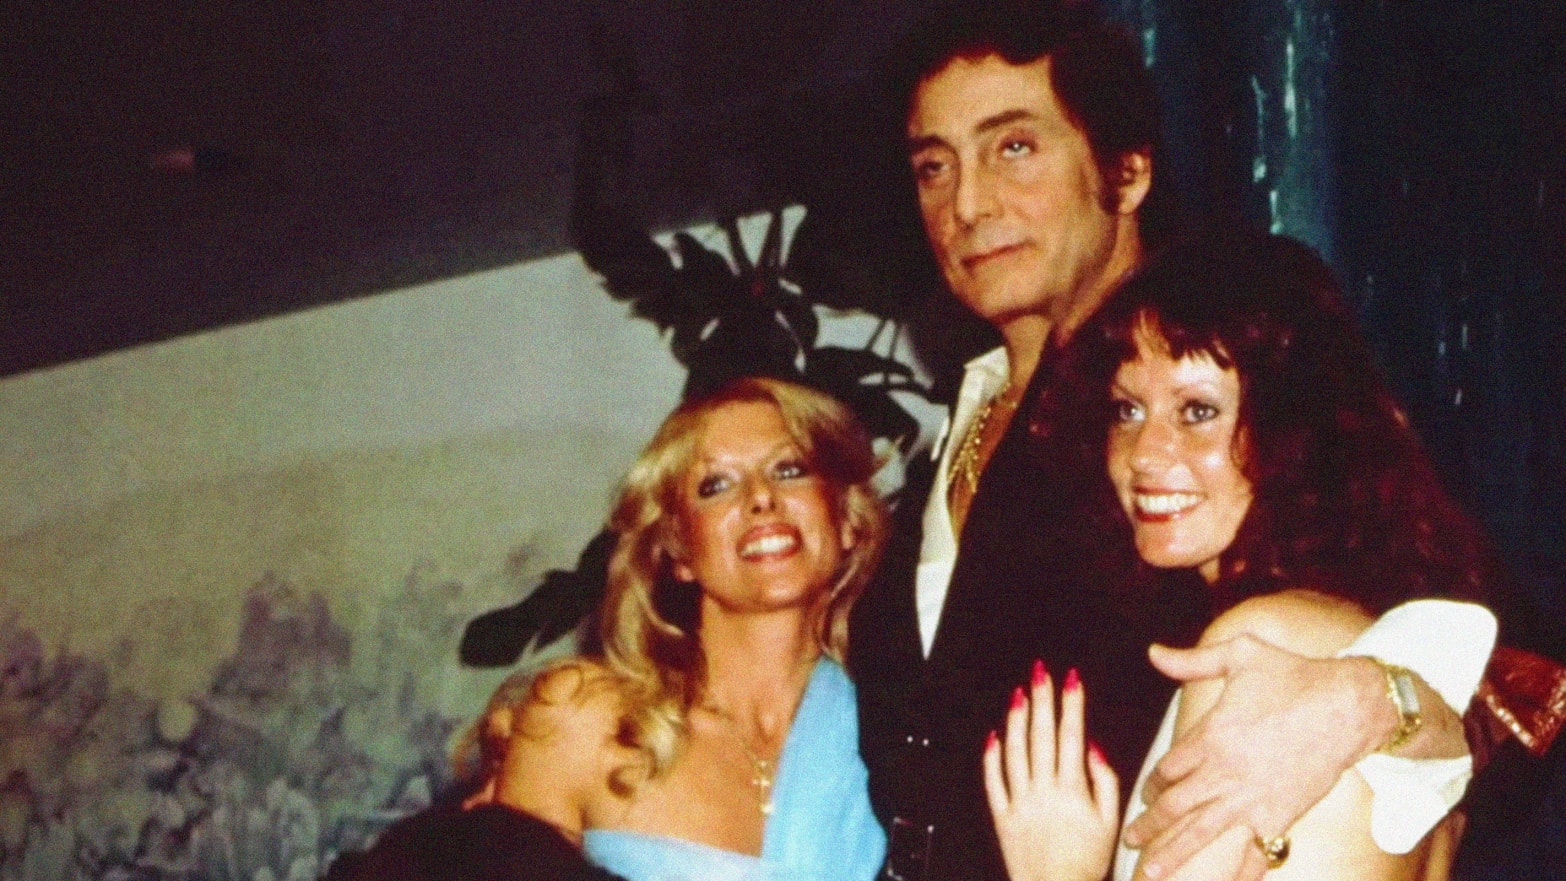 A still from "Secrets of Penthouse" showing Bob Guccione.